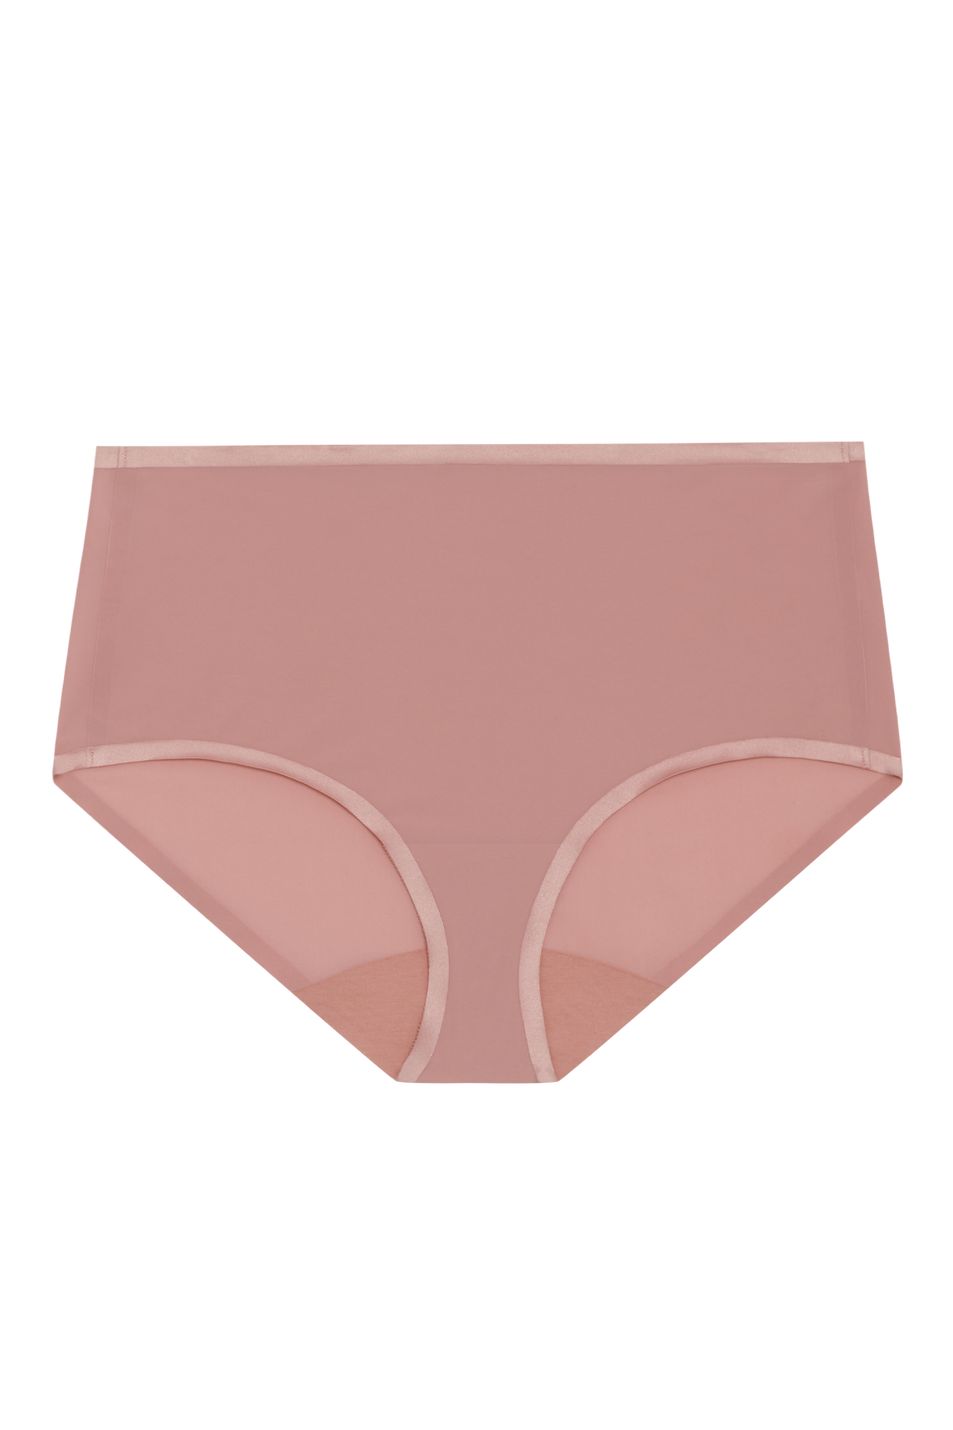 Buy LITE FULL BRIEF by INTIMO AU online - Intimo AU